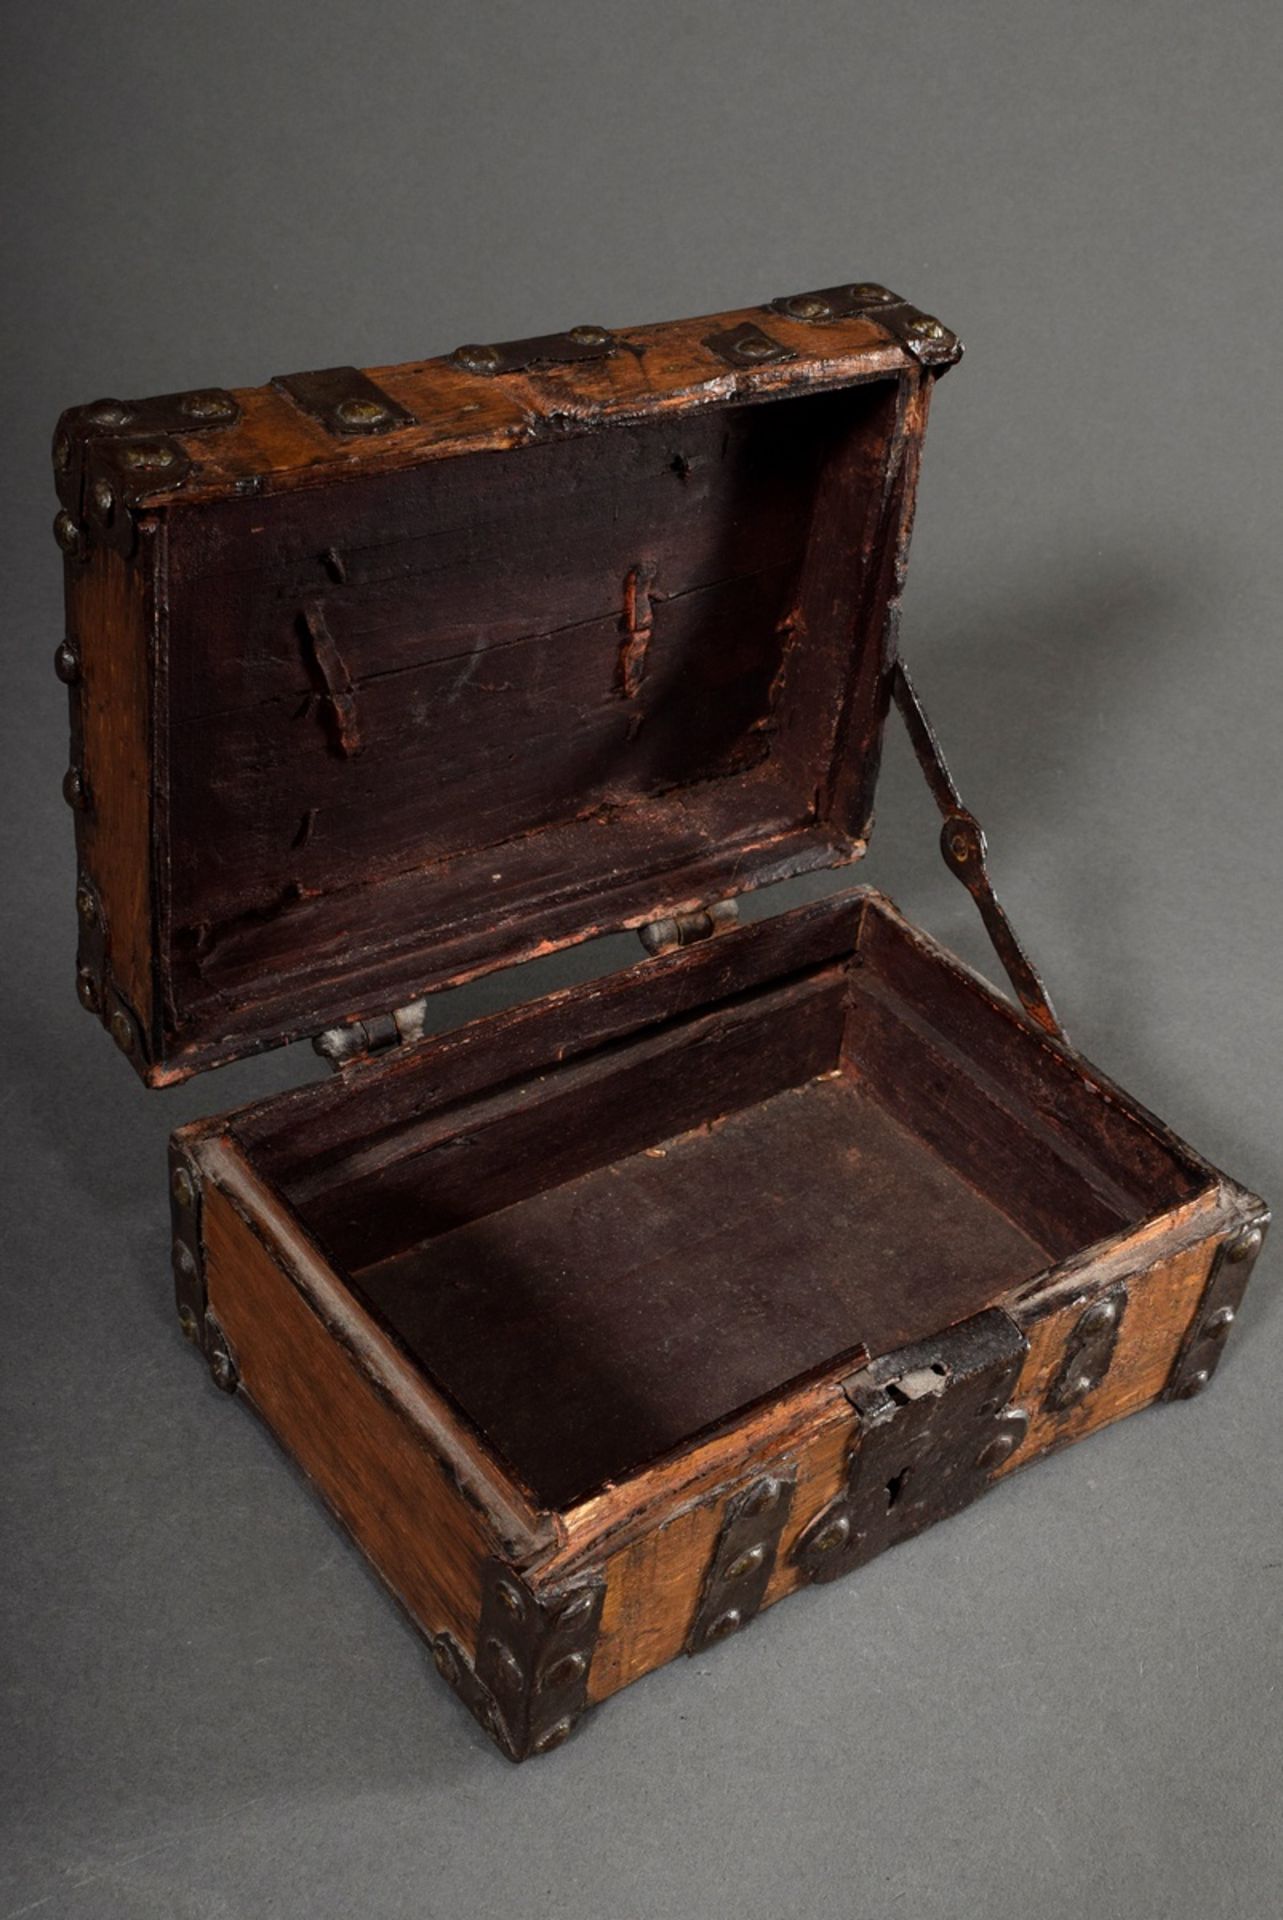 Rustic wooden box with iron band fittings and lock, probably 18th century, 10x20,5x14cm, various de - Image 3 of 7